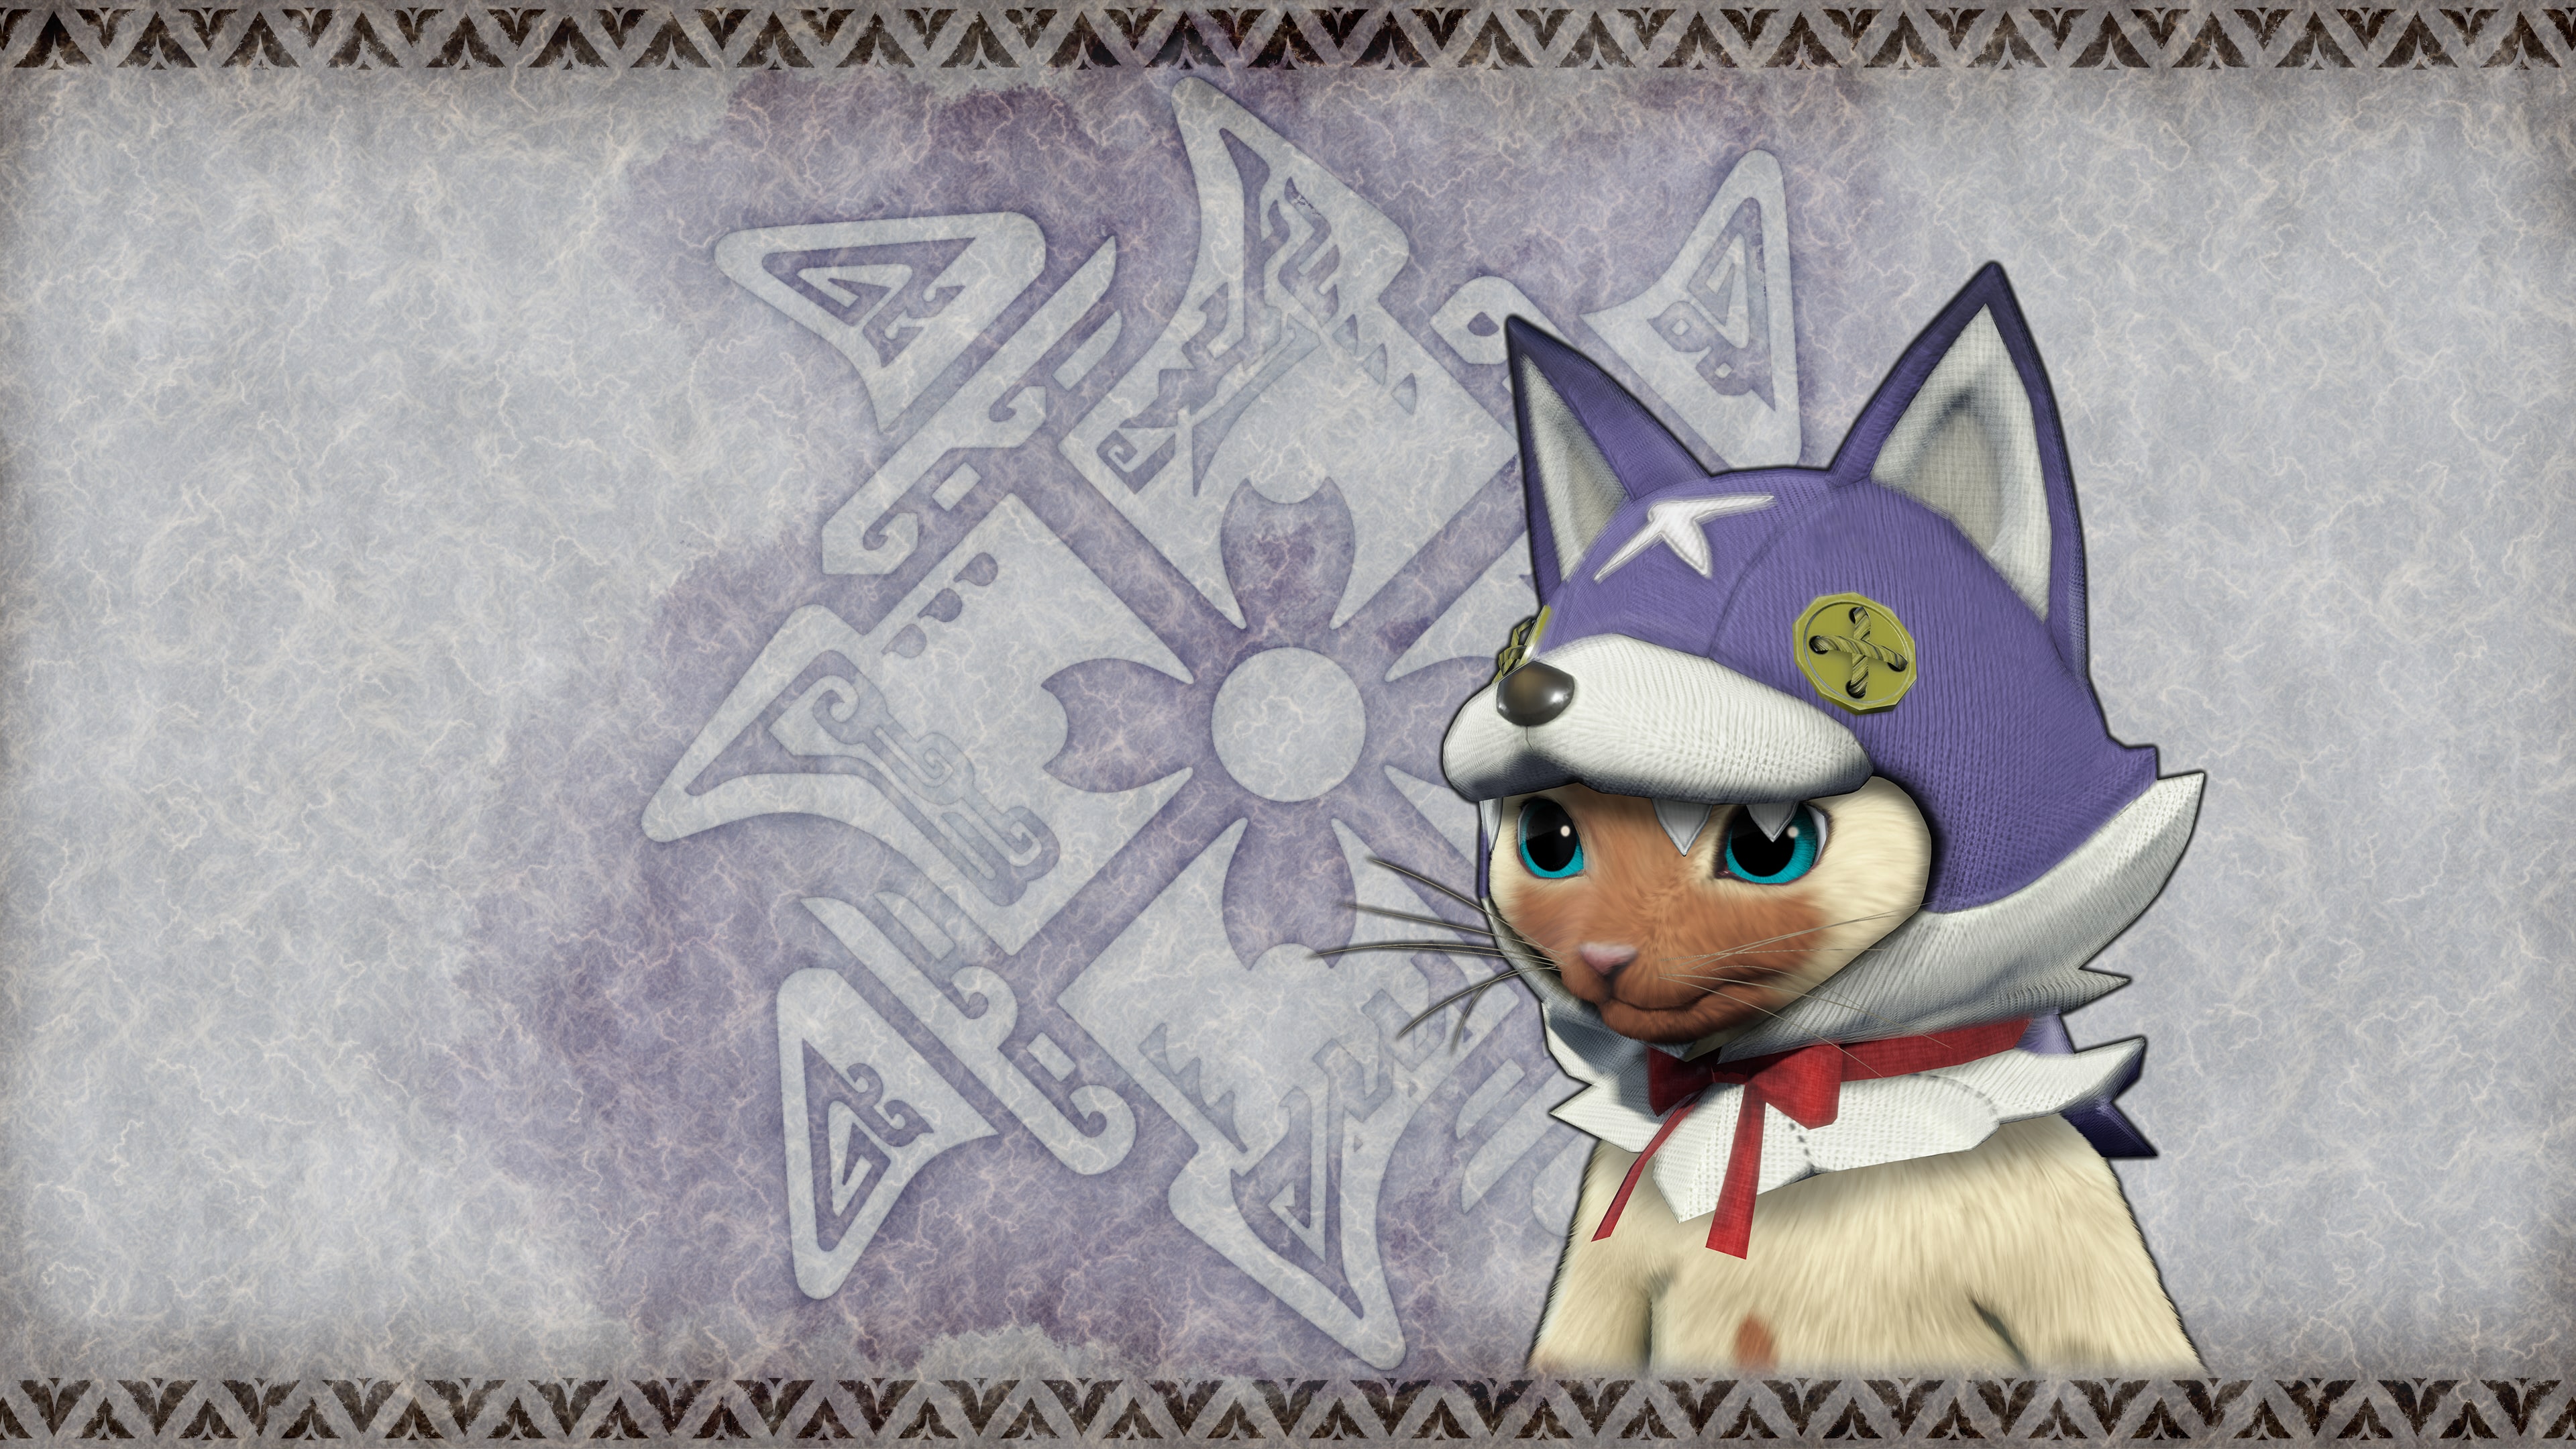 Monster Hunter Rise - "Canyne Mask" Palico layered armor piece